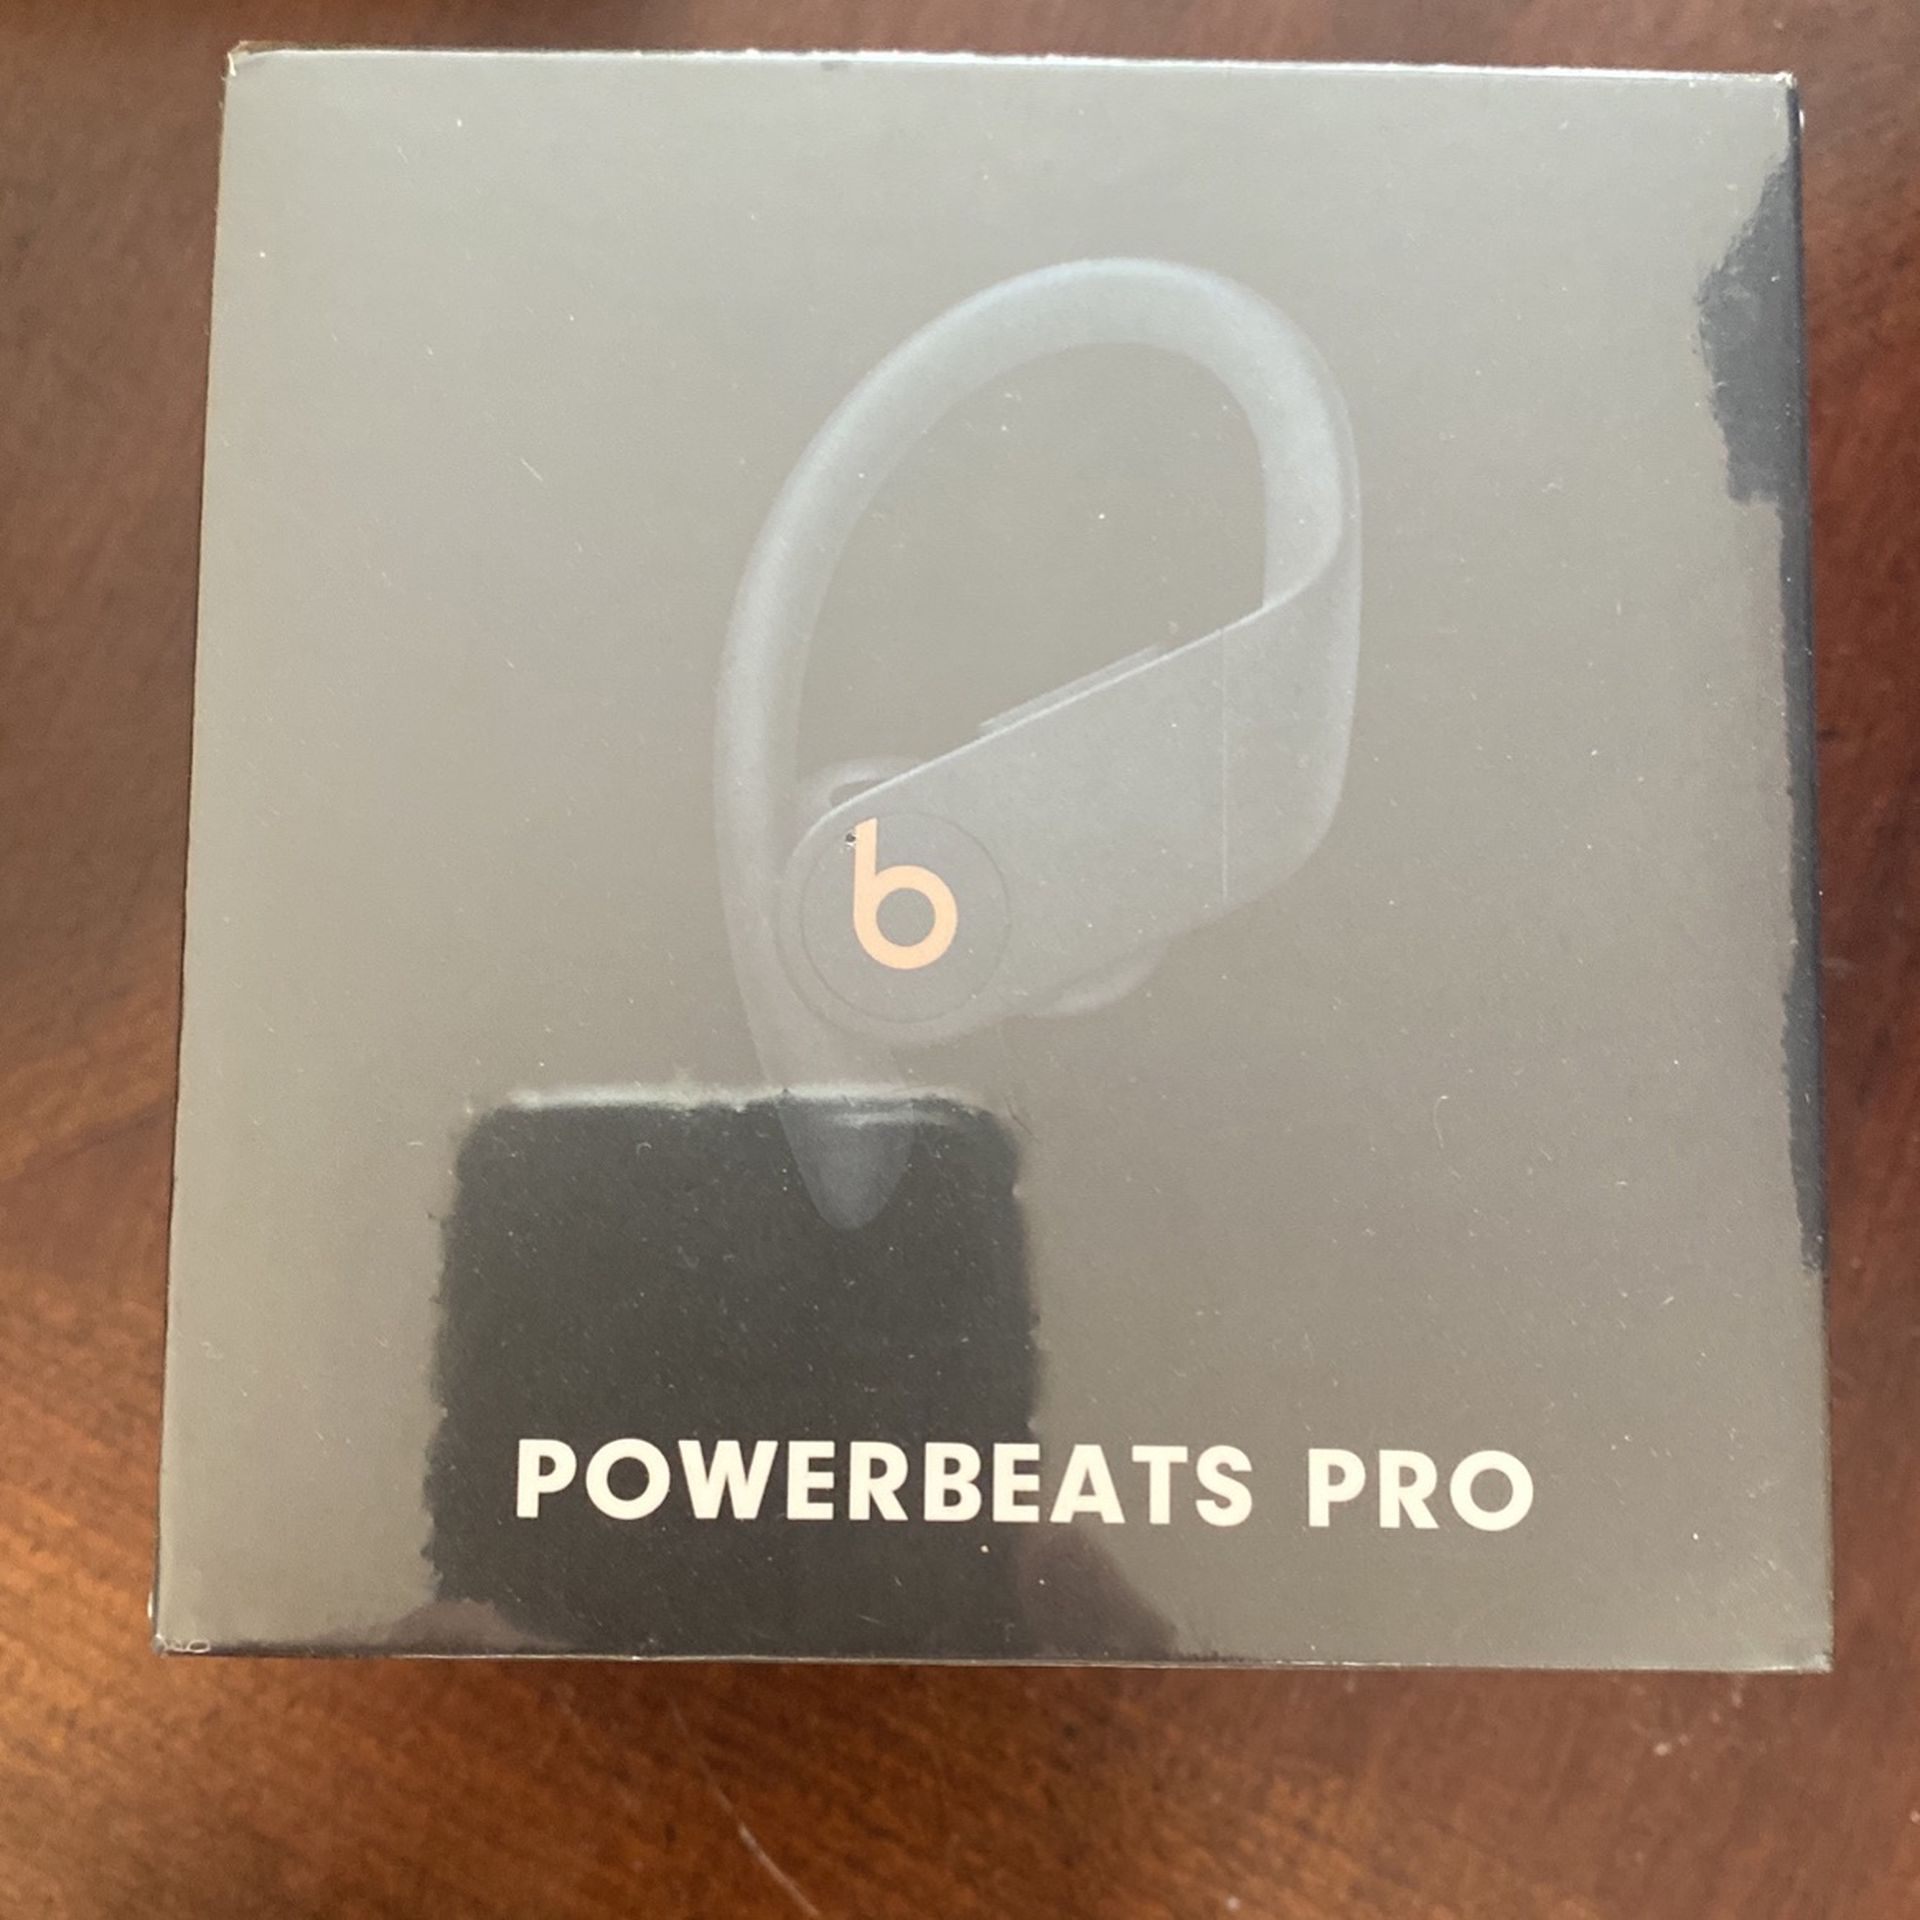 Powerbeats Pro - New in Box - Navy or Cloud Pink